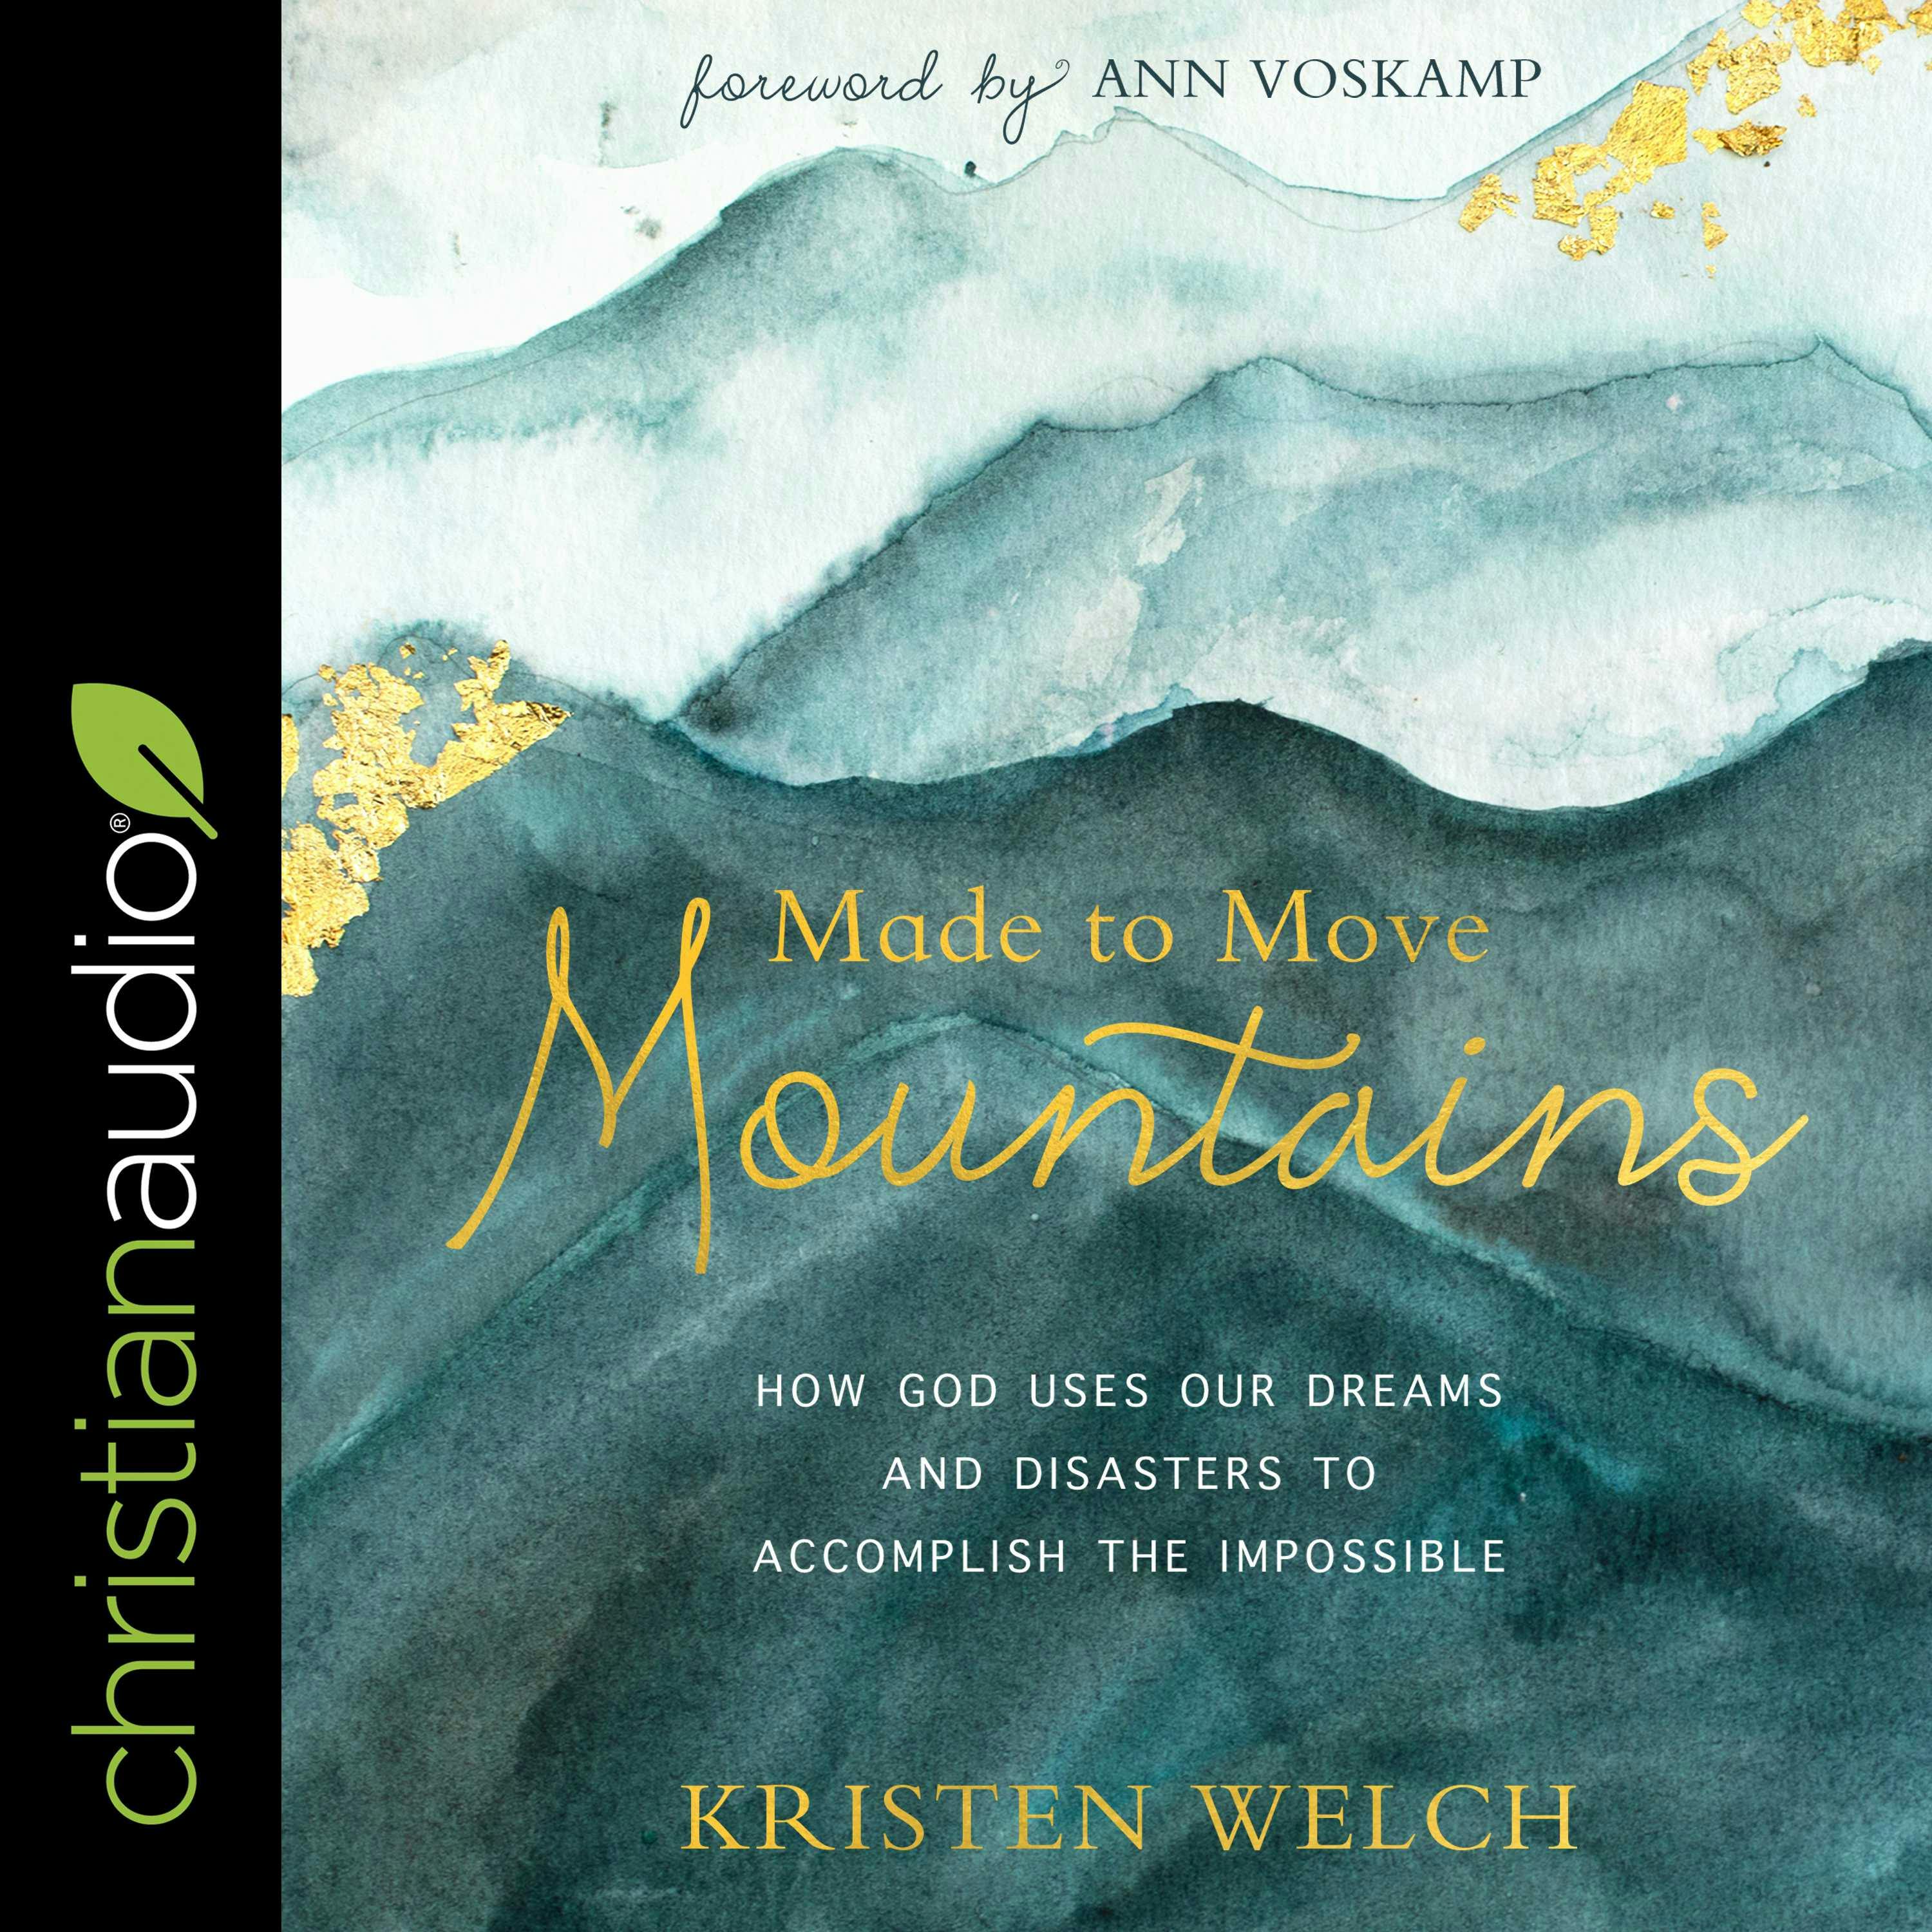 Made to Move Mountains: How God Uses Our Dreams And Disasters To Accomplish The Impossible - Kristen Welch